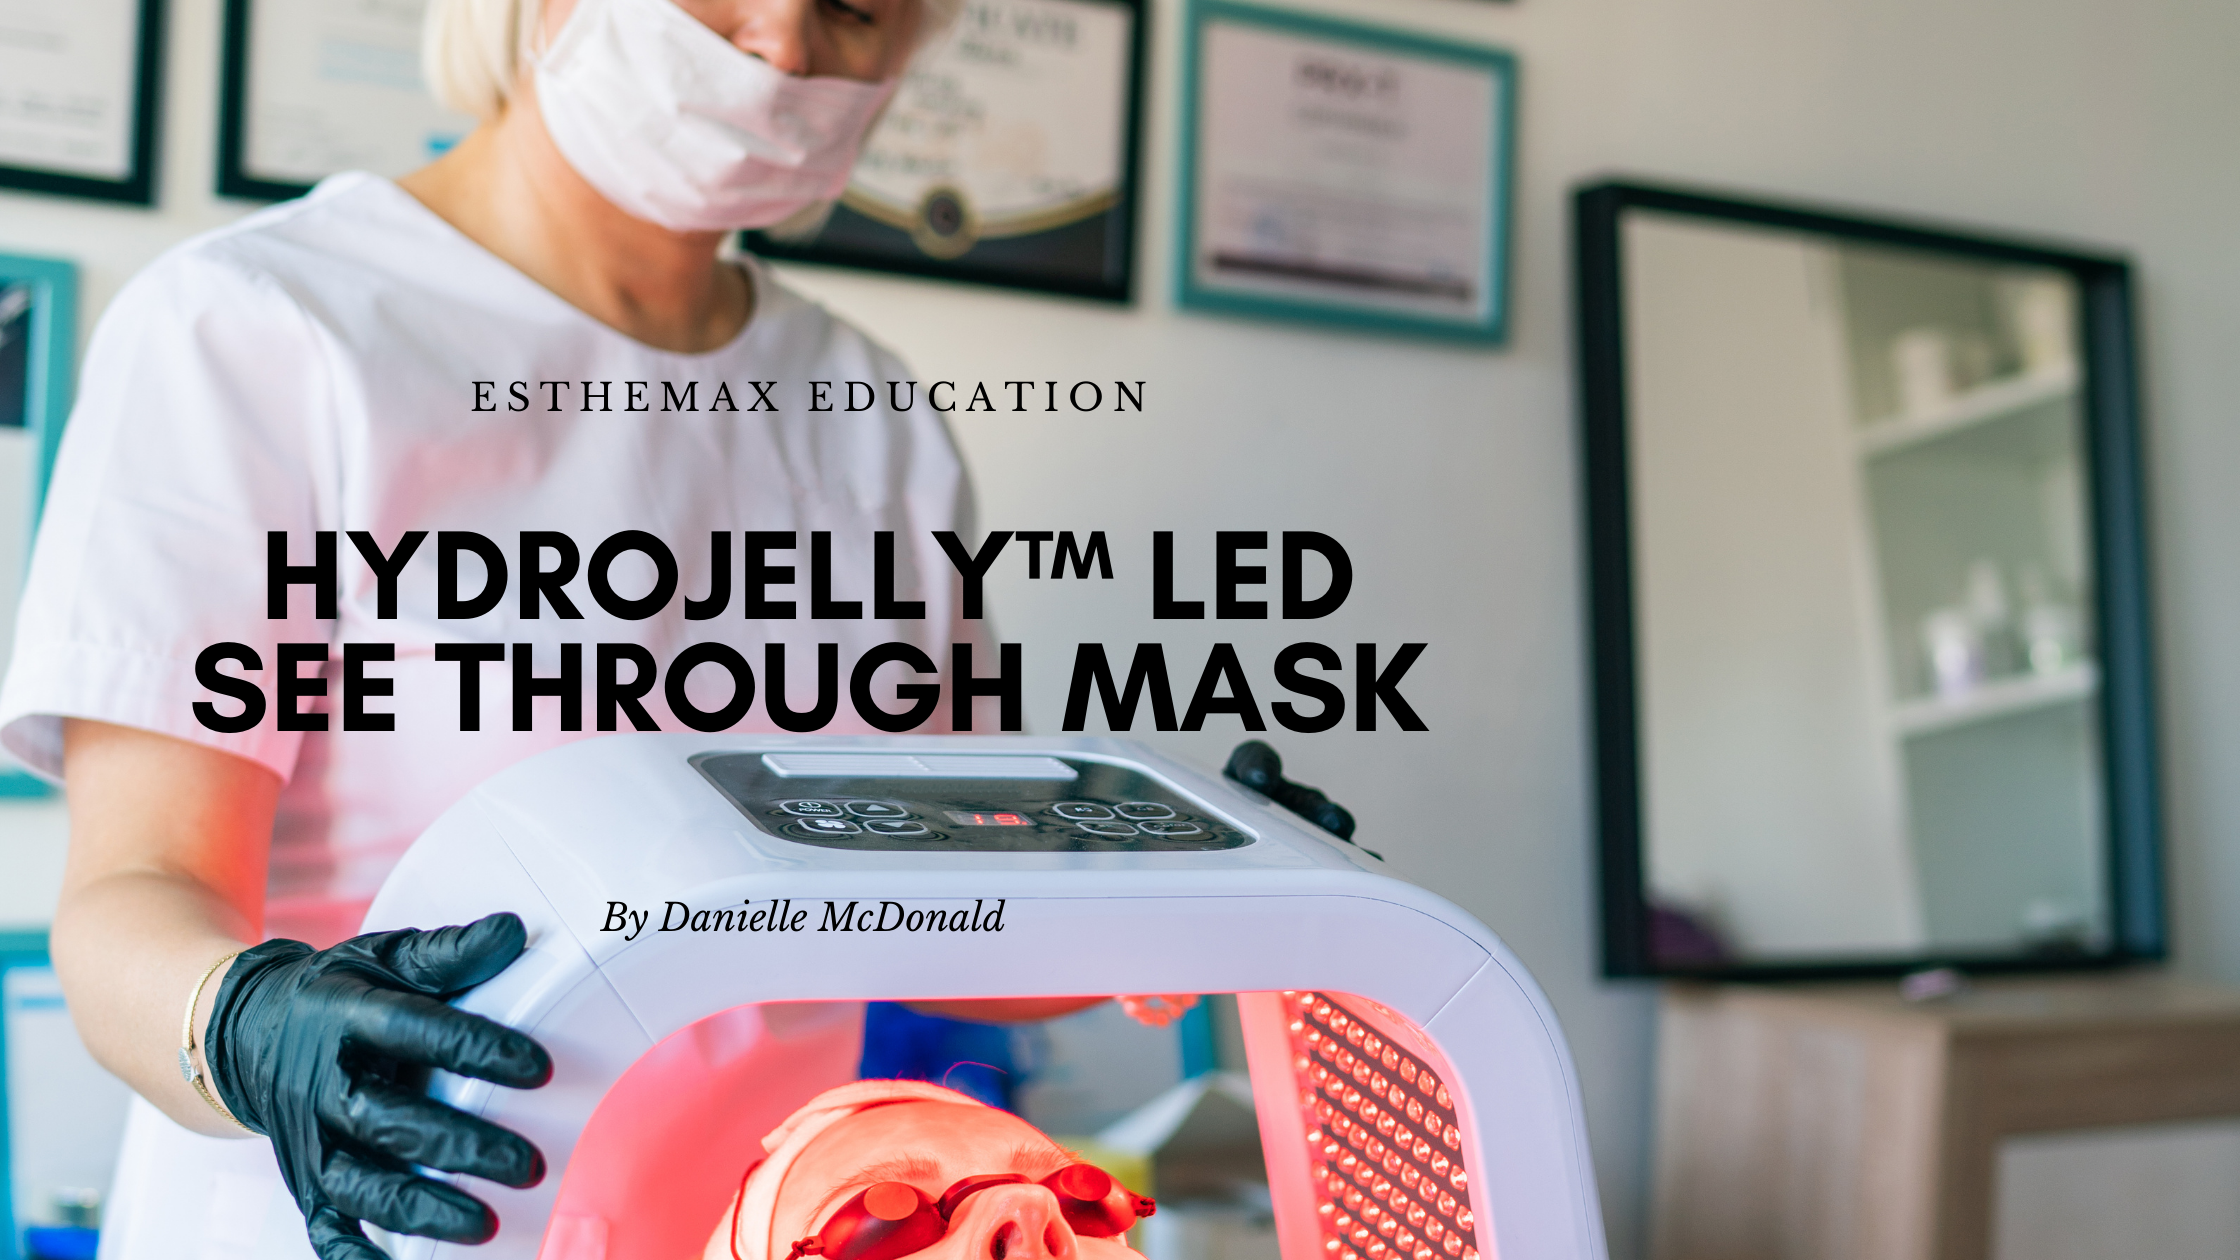 Esthemax Hydrojelly™ LED See through Mask launches in Australia